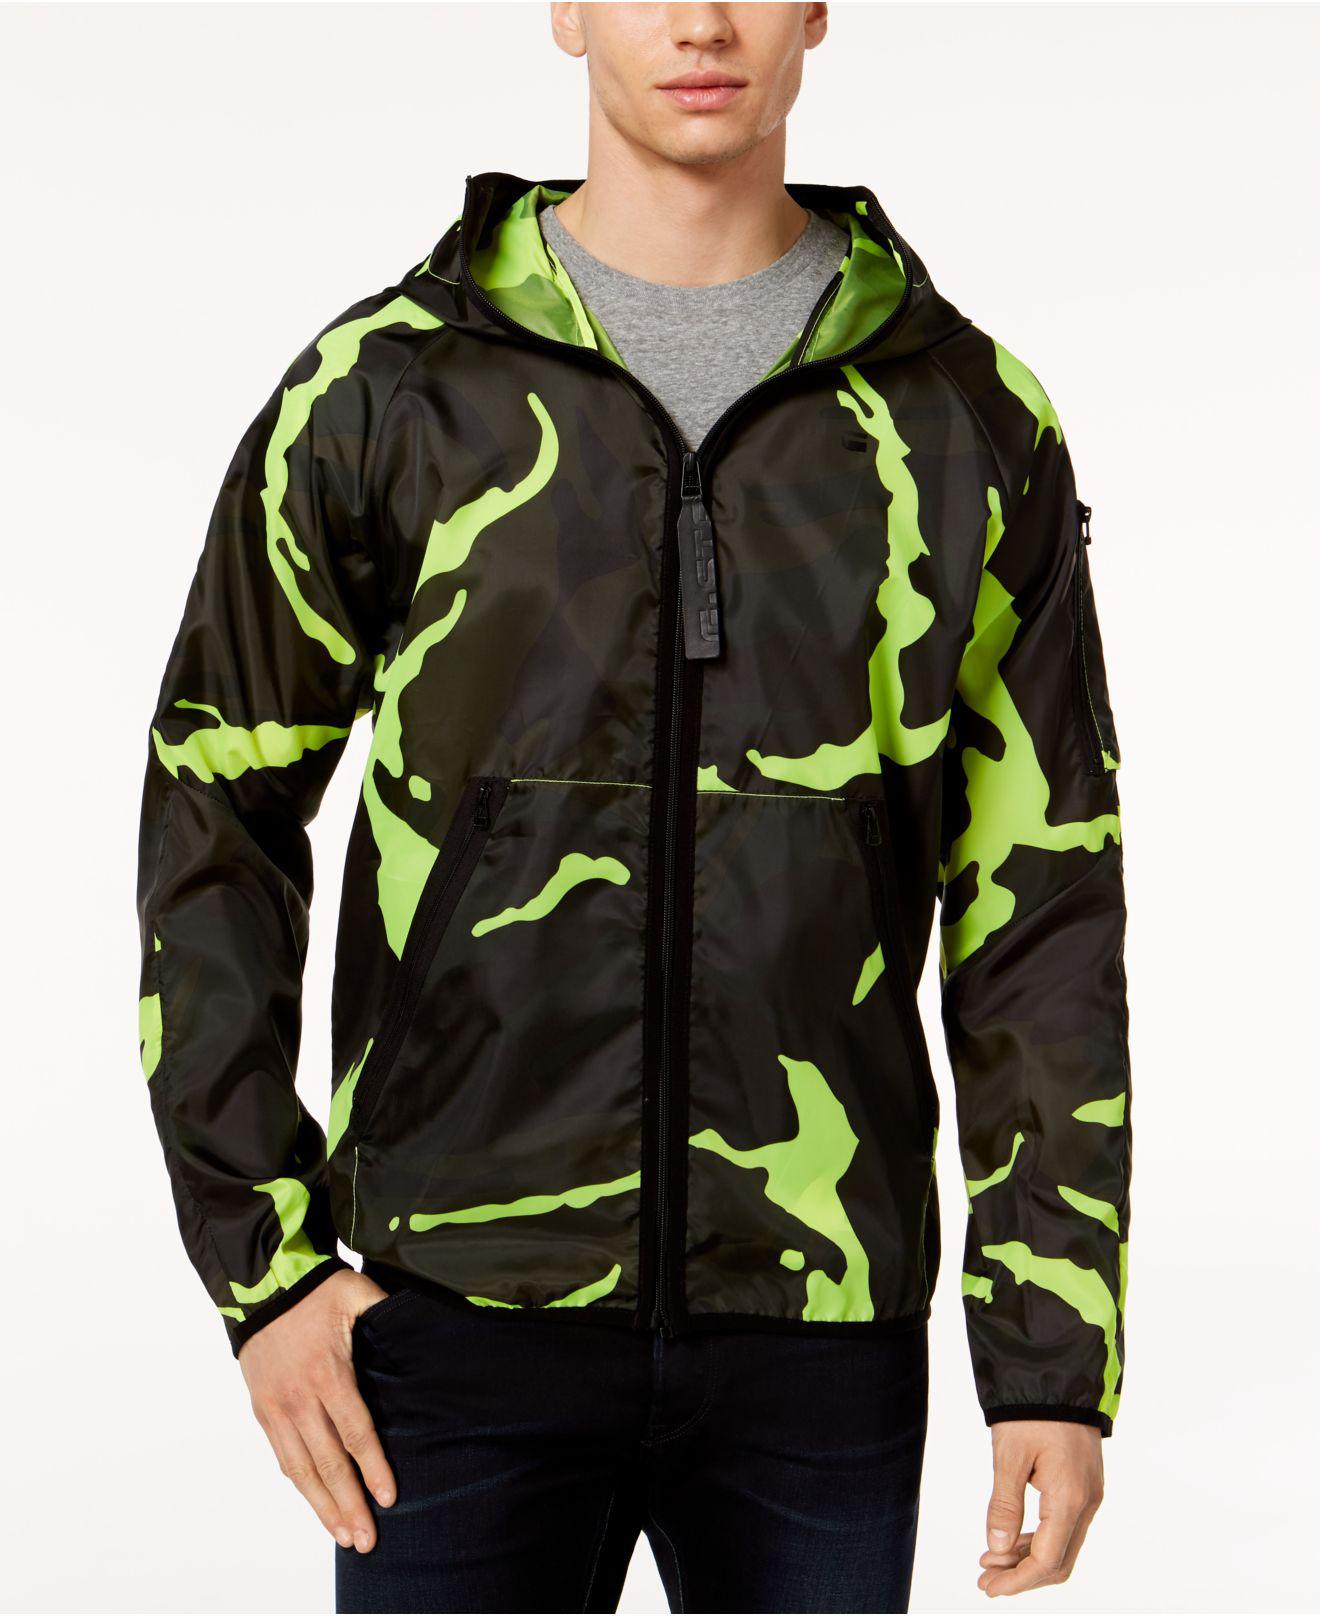 G-Star RAW Synthetic Strett Neon Camouflage Hooded Jacket in Neon  Yellow/Asphalt (Green) for Men - Lyst